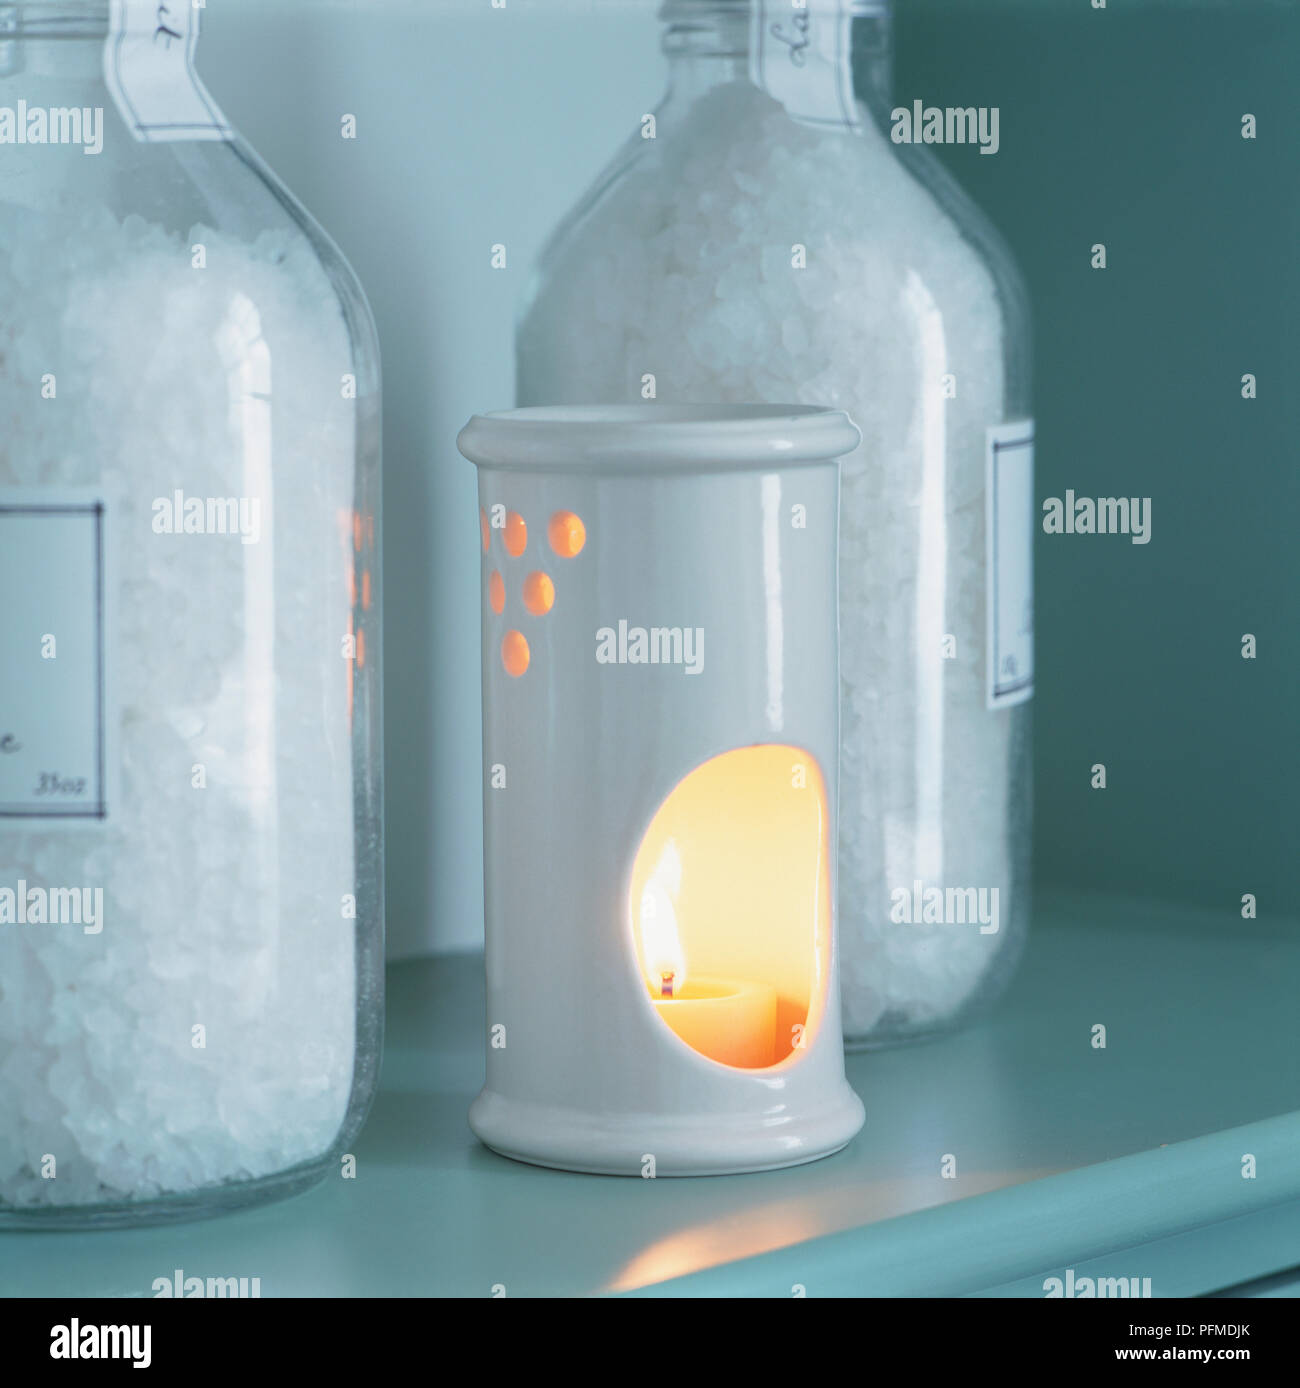 Tealight candle with flame burning inside white porcelain oil burner, glass bottles containing salts standing on shelf either side. Stock Photo